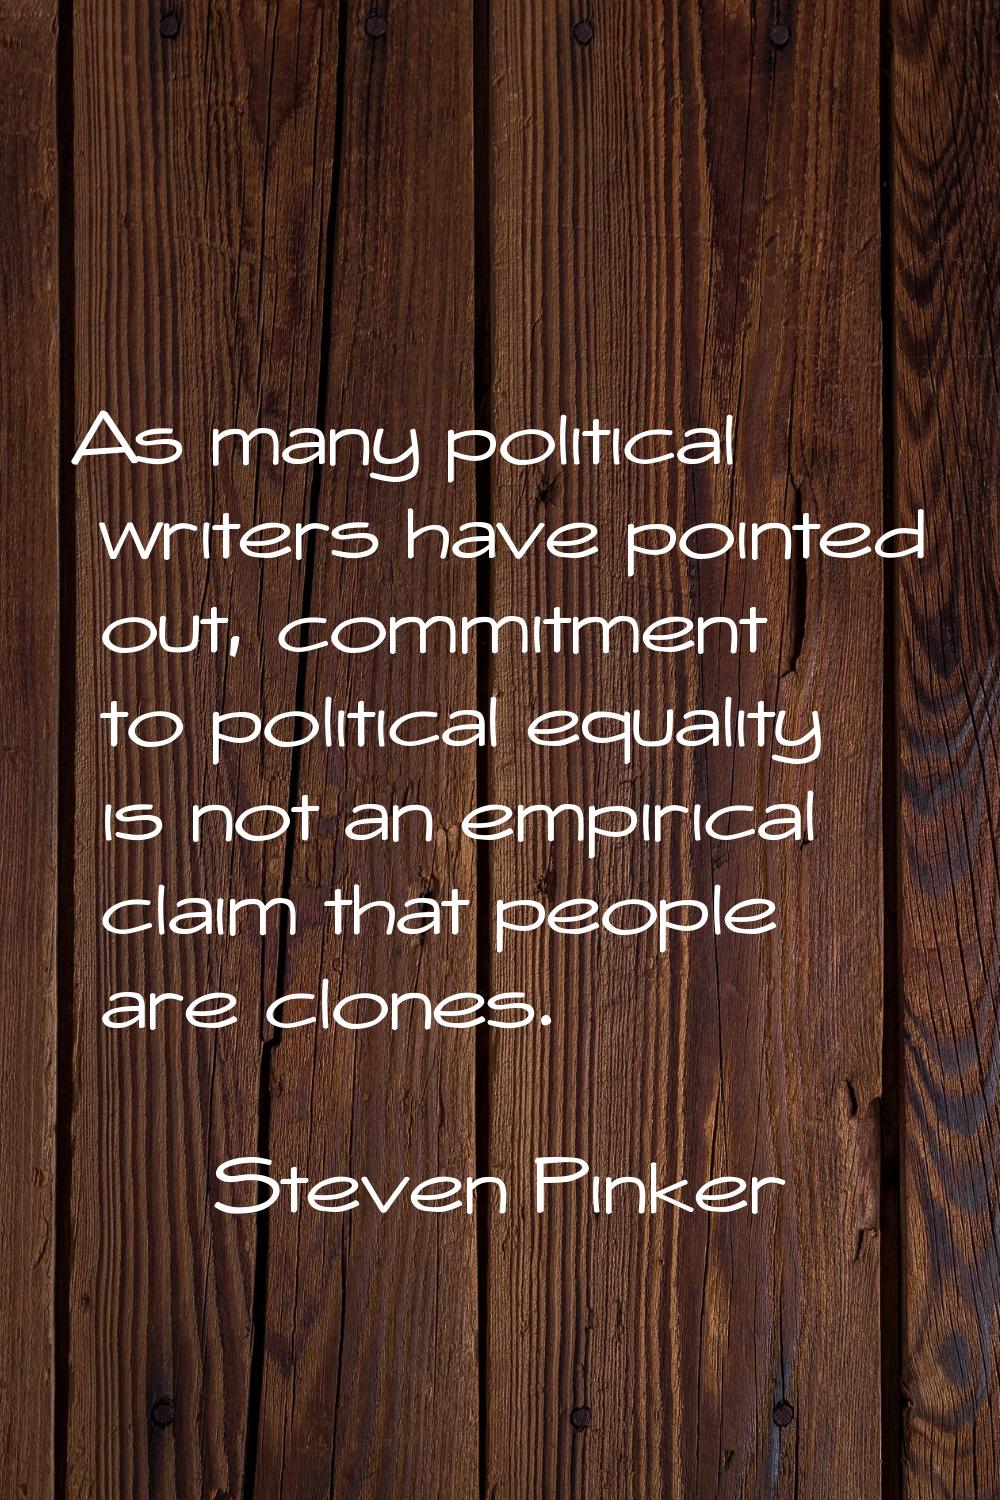 As many political writers have pointed out, commitment to political equality is not an empirical cl